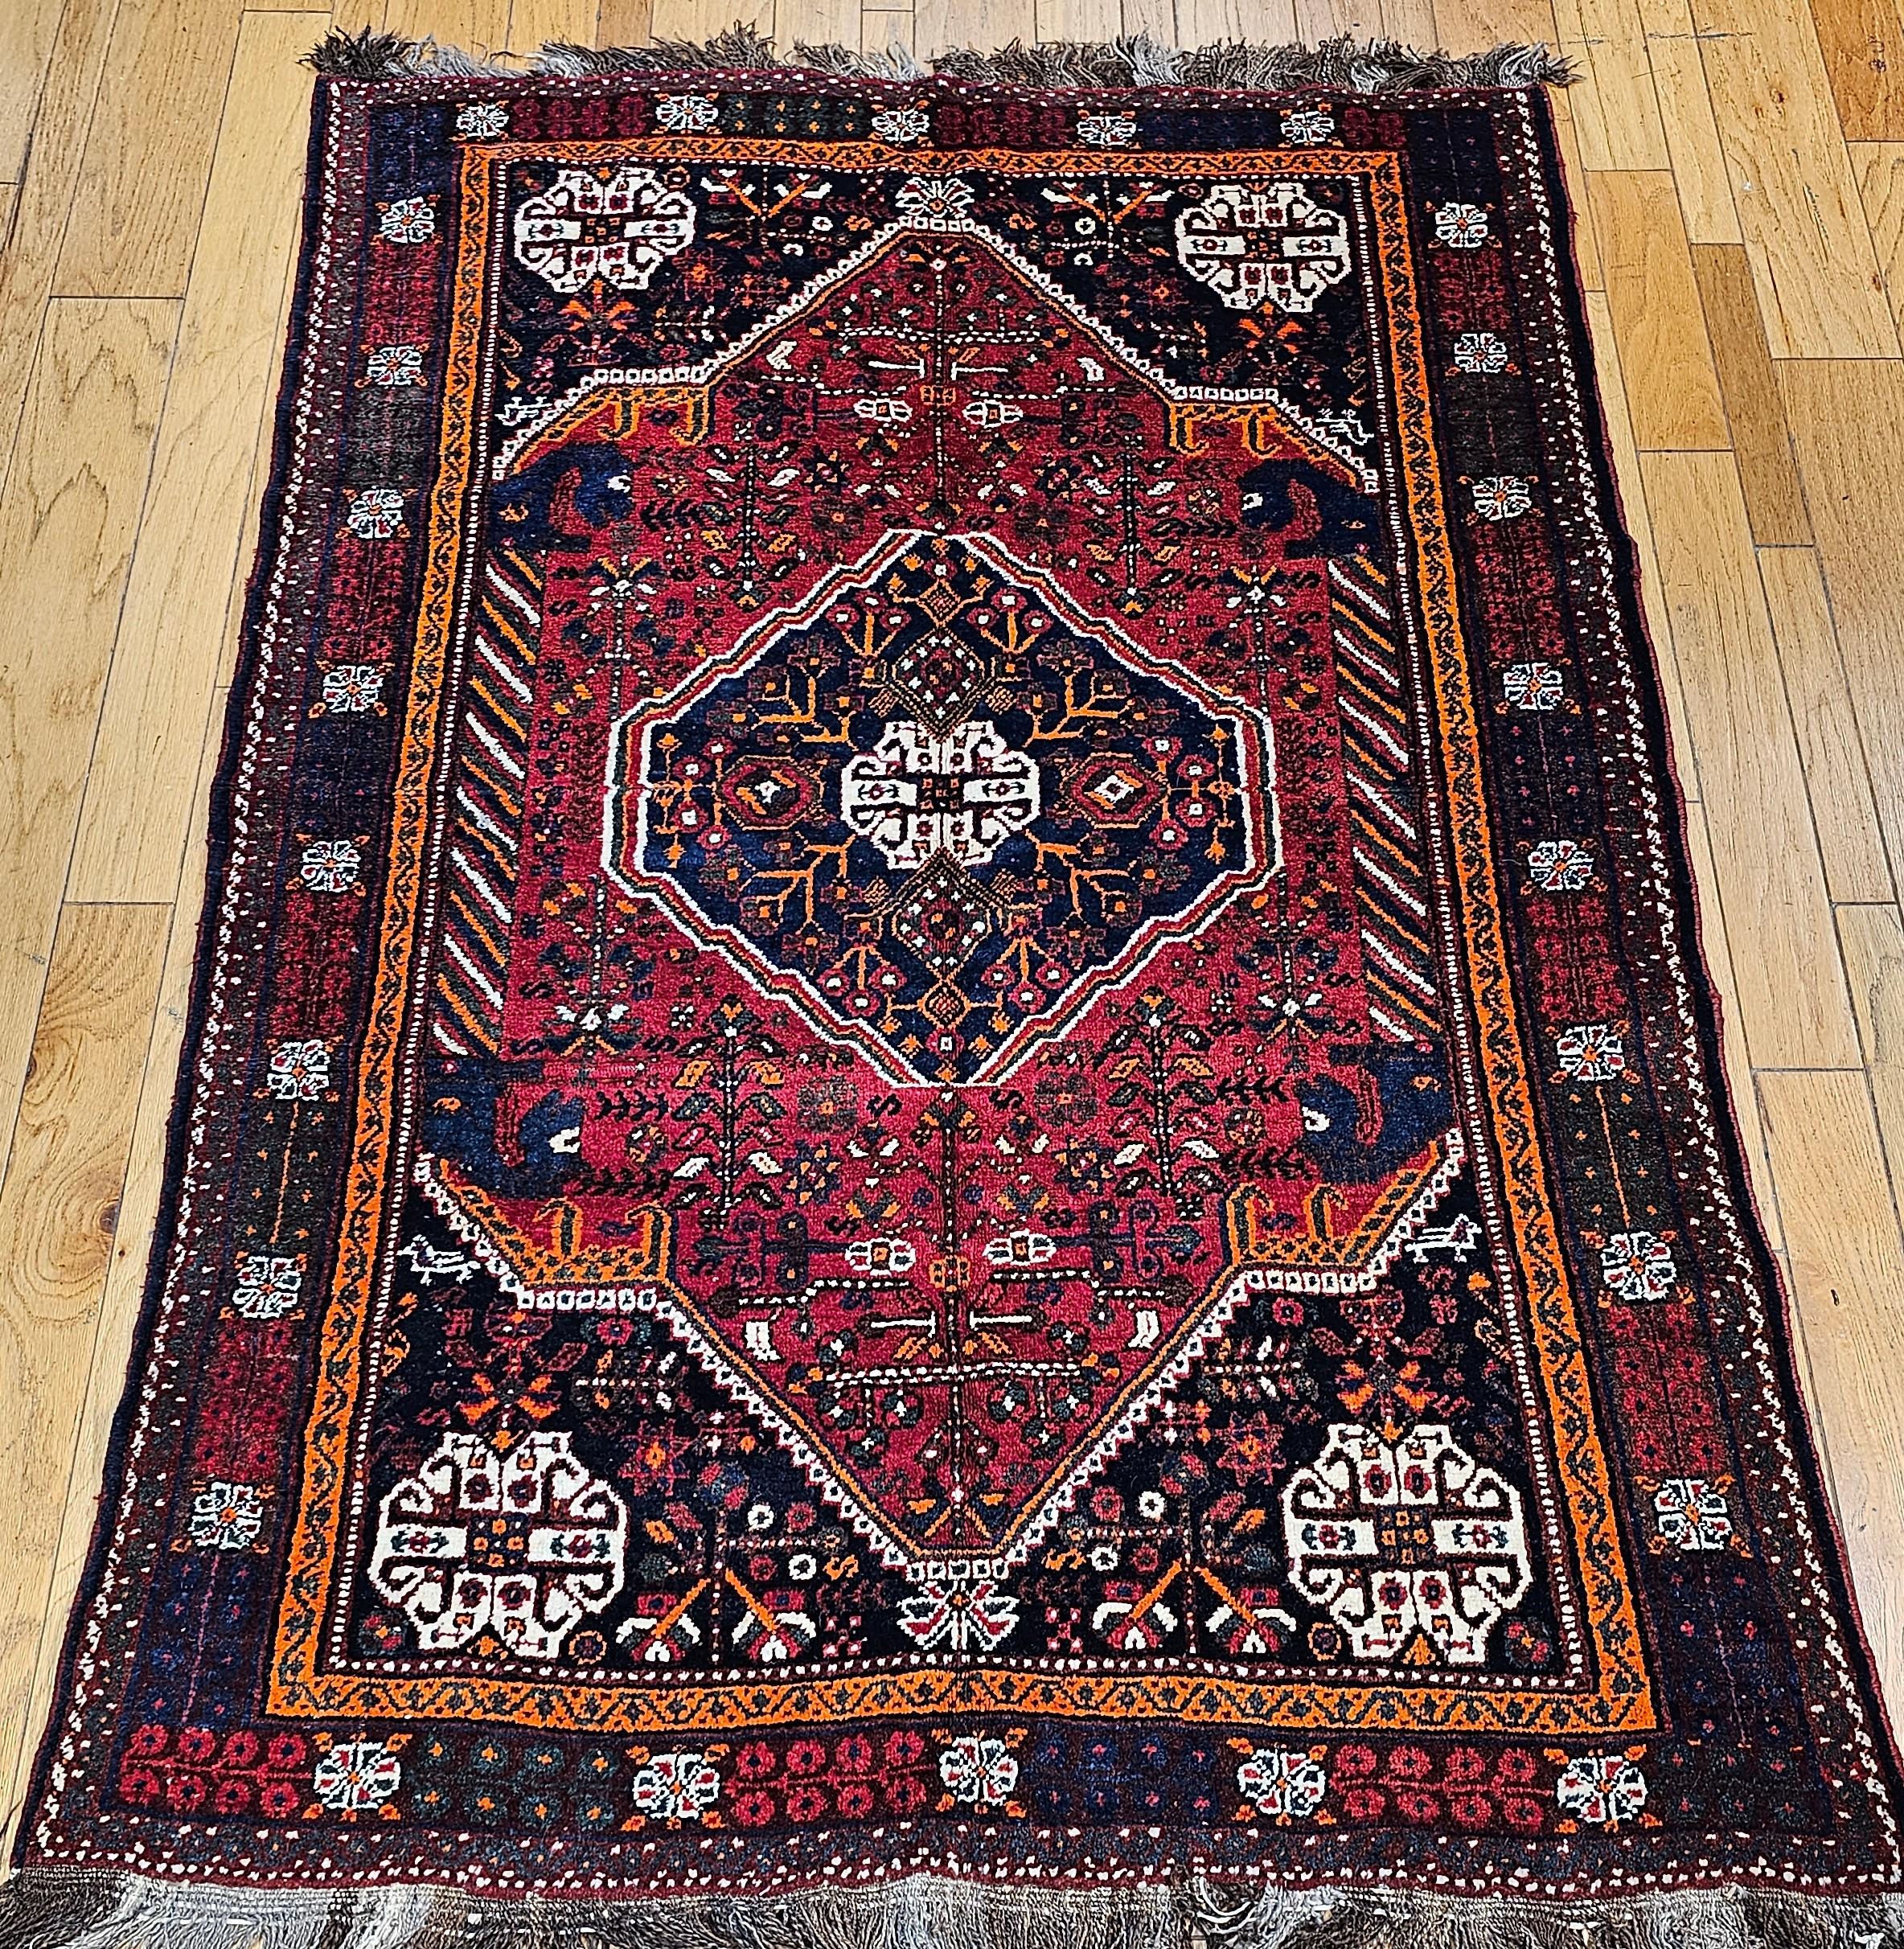 Vintage Persian Qashqai(Ghashghai) tribal carpet from Southwestern Persia circa the mid 1900s.   The Qashqai rug has a traditional tribal design format which includes one central medallion and four small medallions in the corner spandrels. It has a